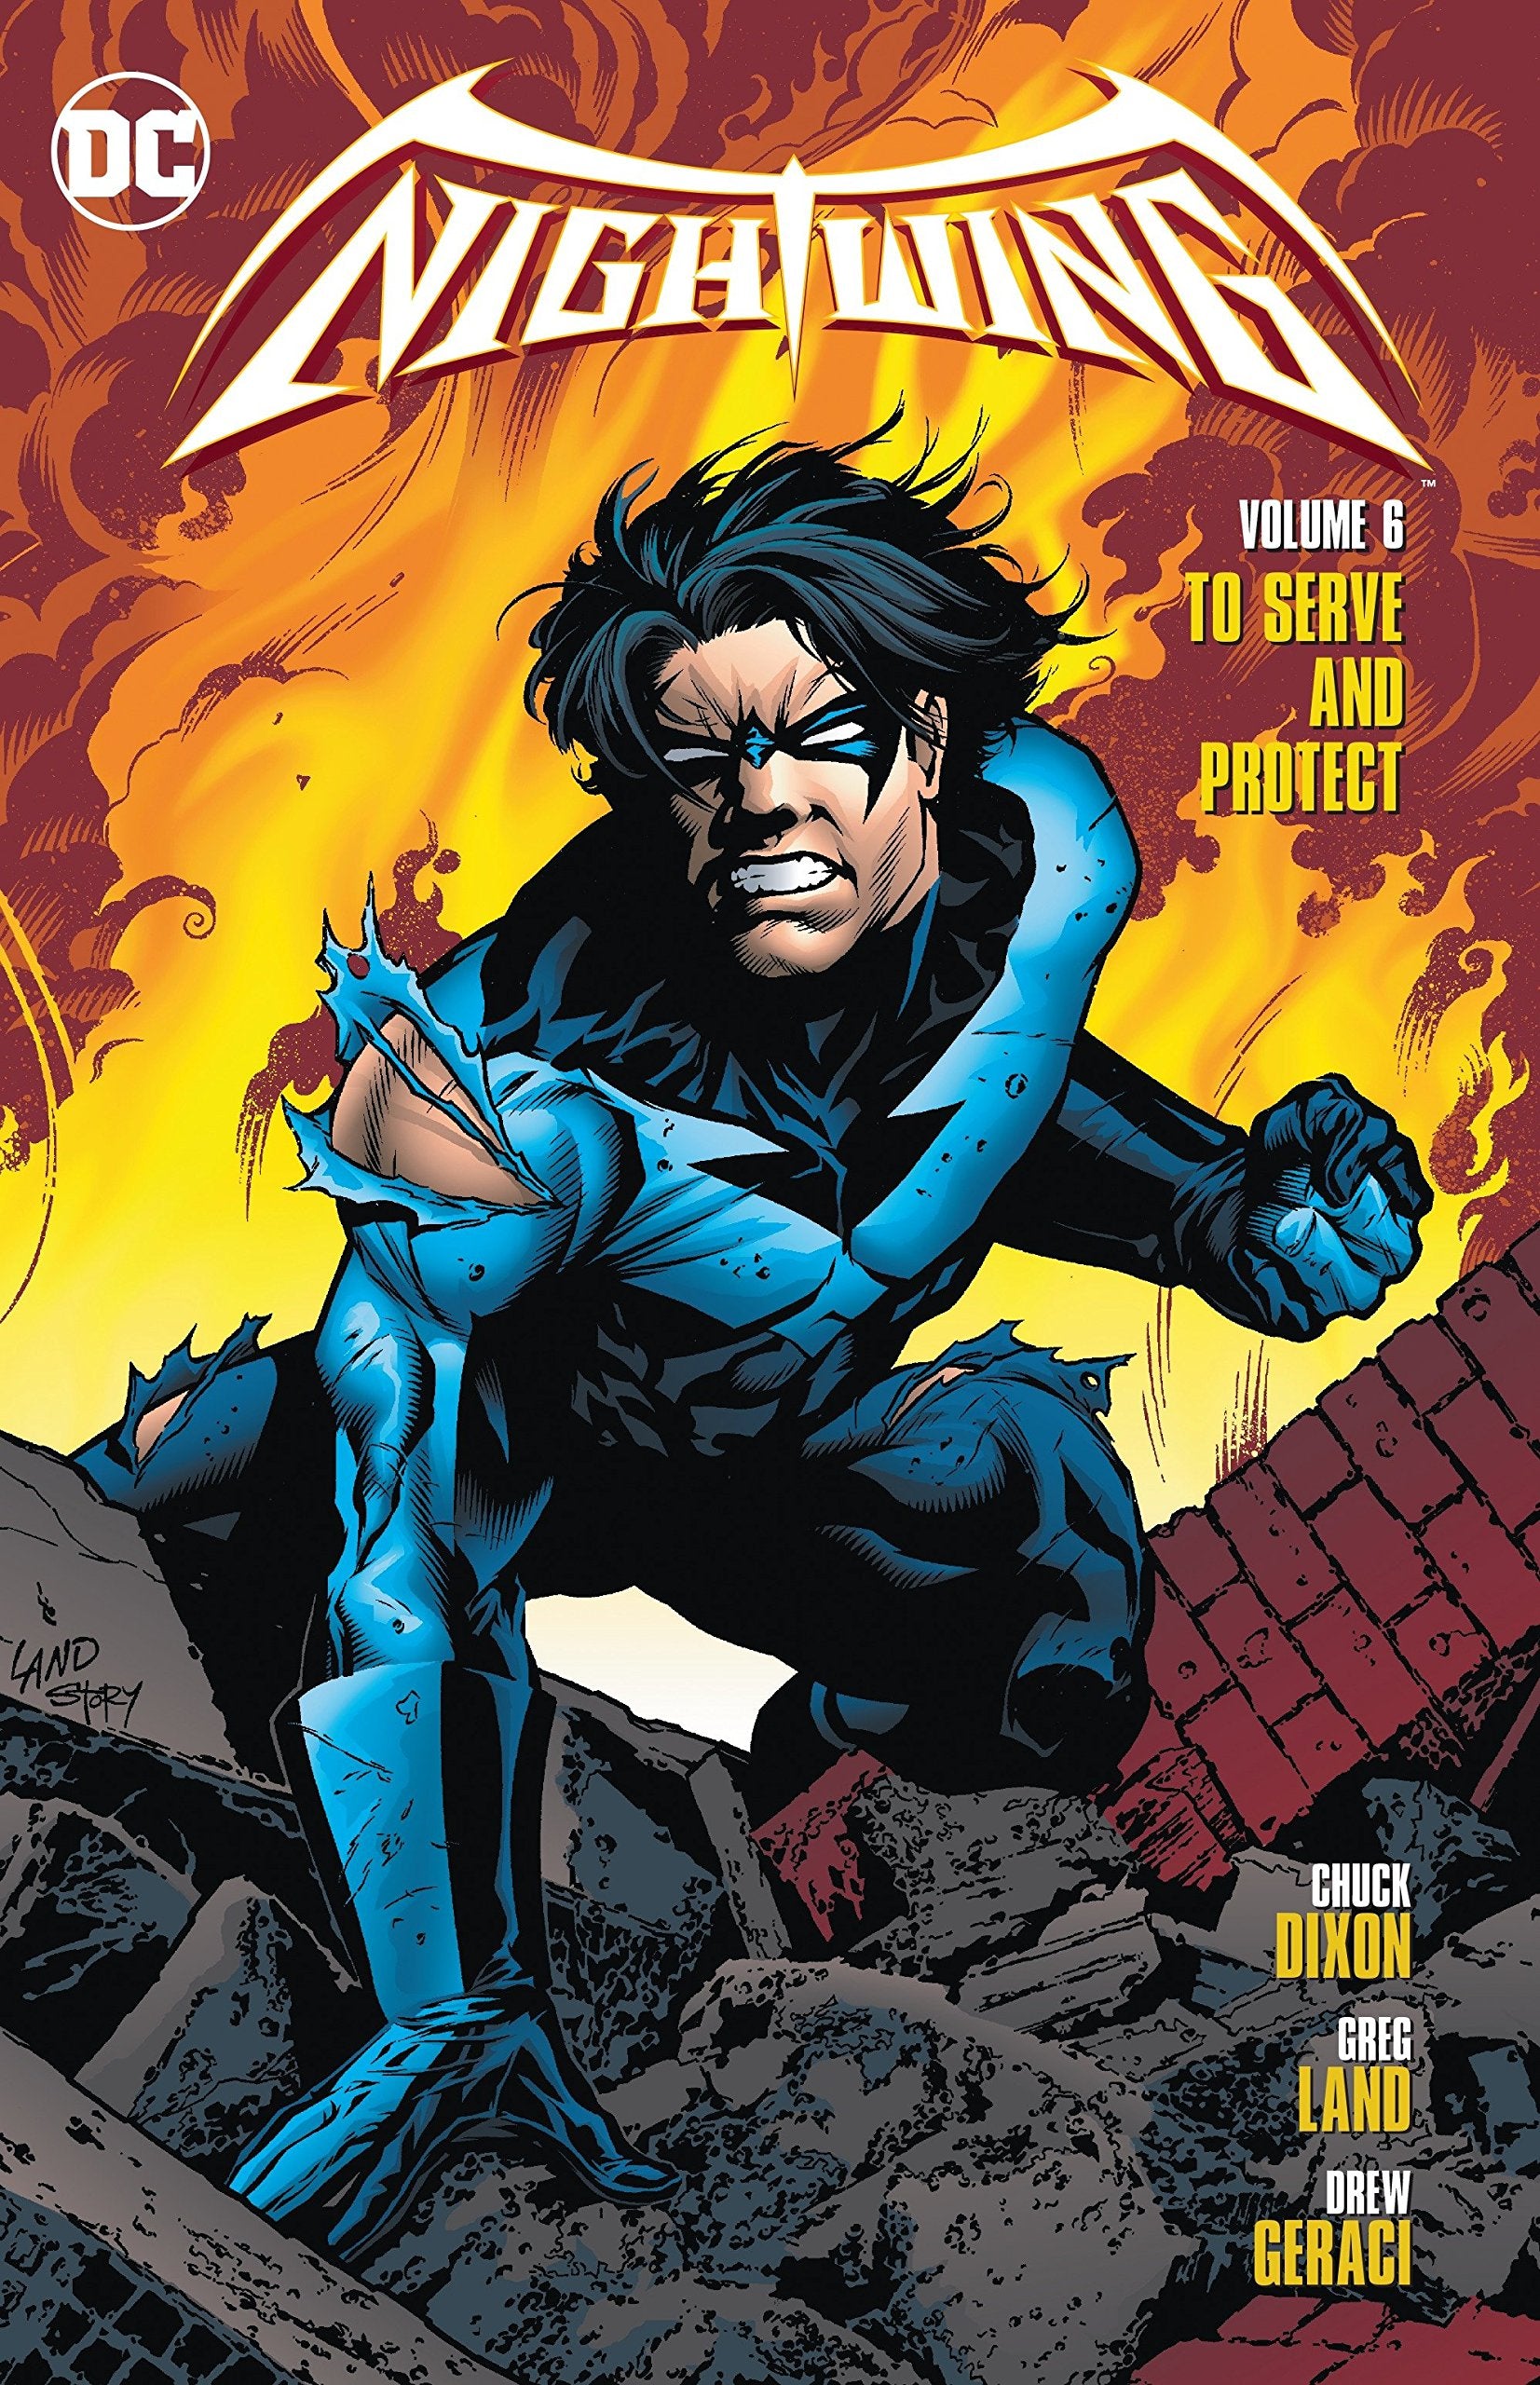 Nightwing Volume 6 To Serve And Protect